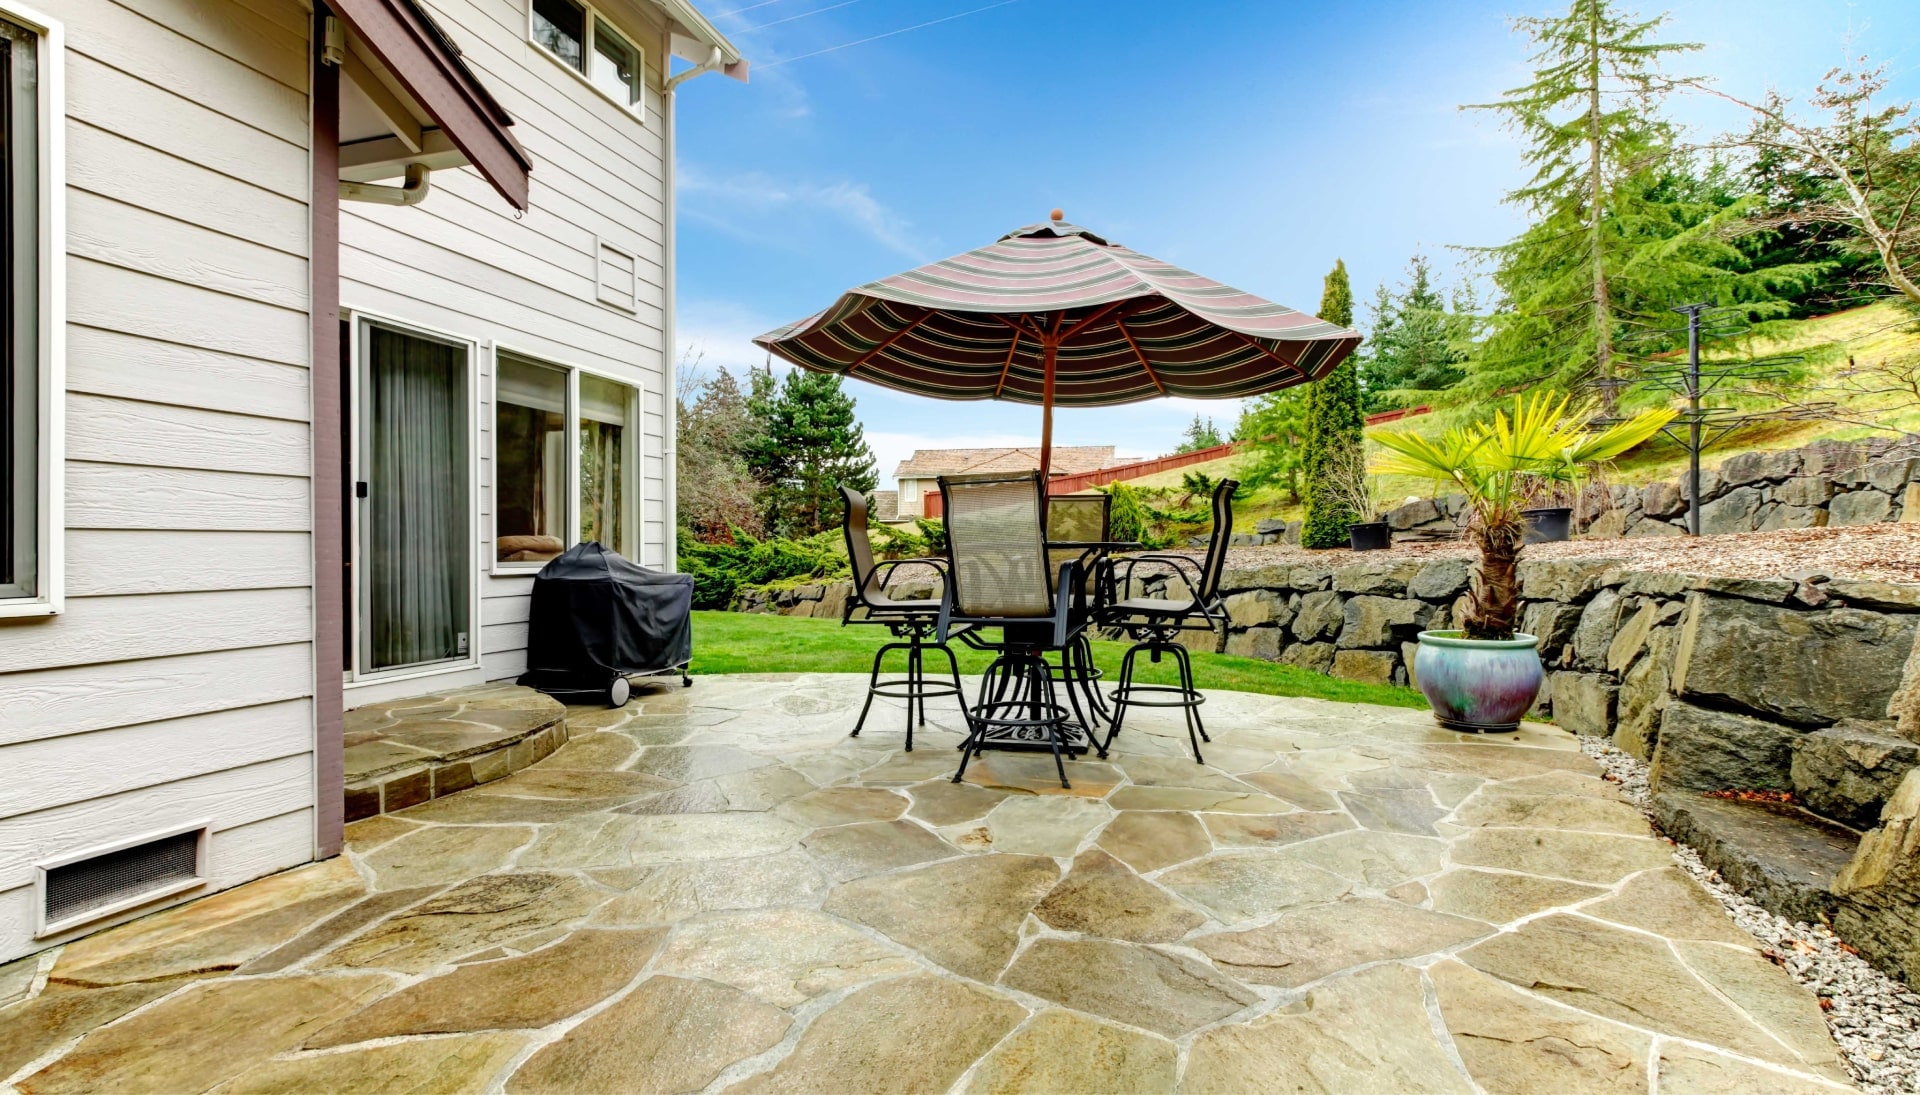 Beautifully Textured and Patterned Concrete Patios in Modesto, California area!